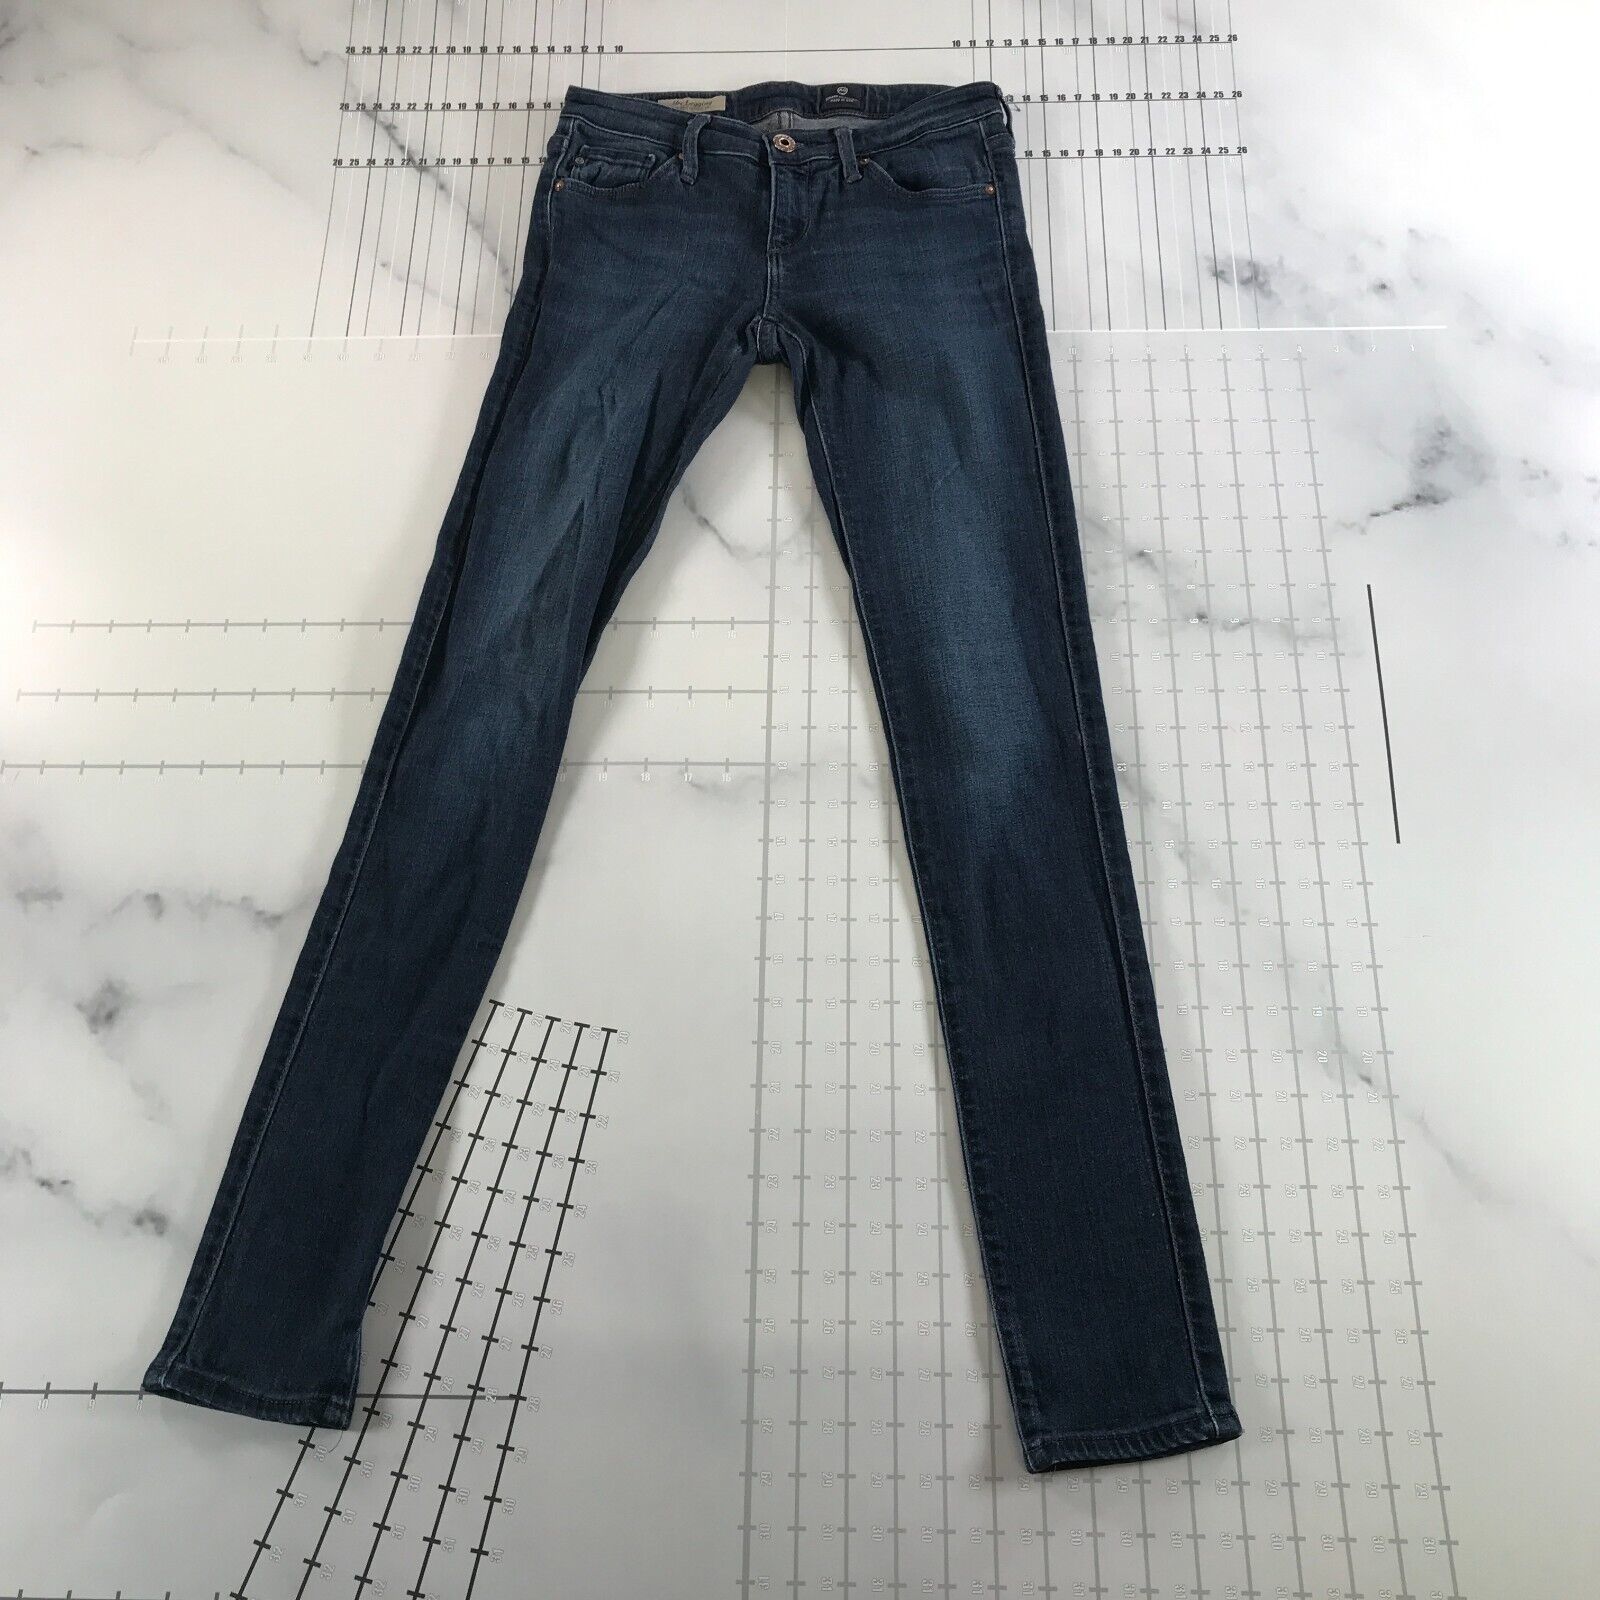 Primary image for AG Adriano Goldshmied Jeans Womens 24 Blue Low Rise Skinny Cotton Blend USA